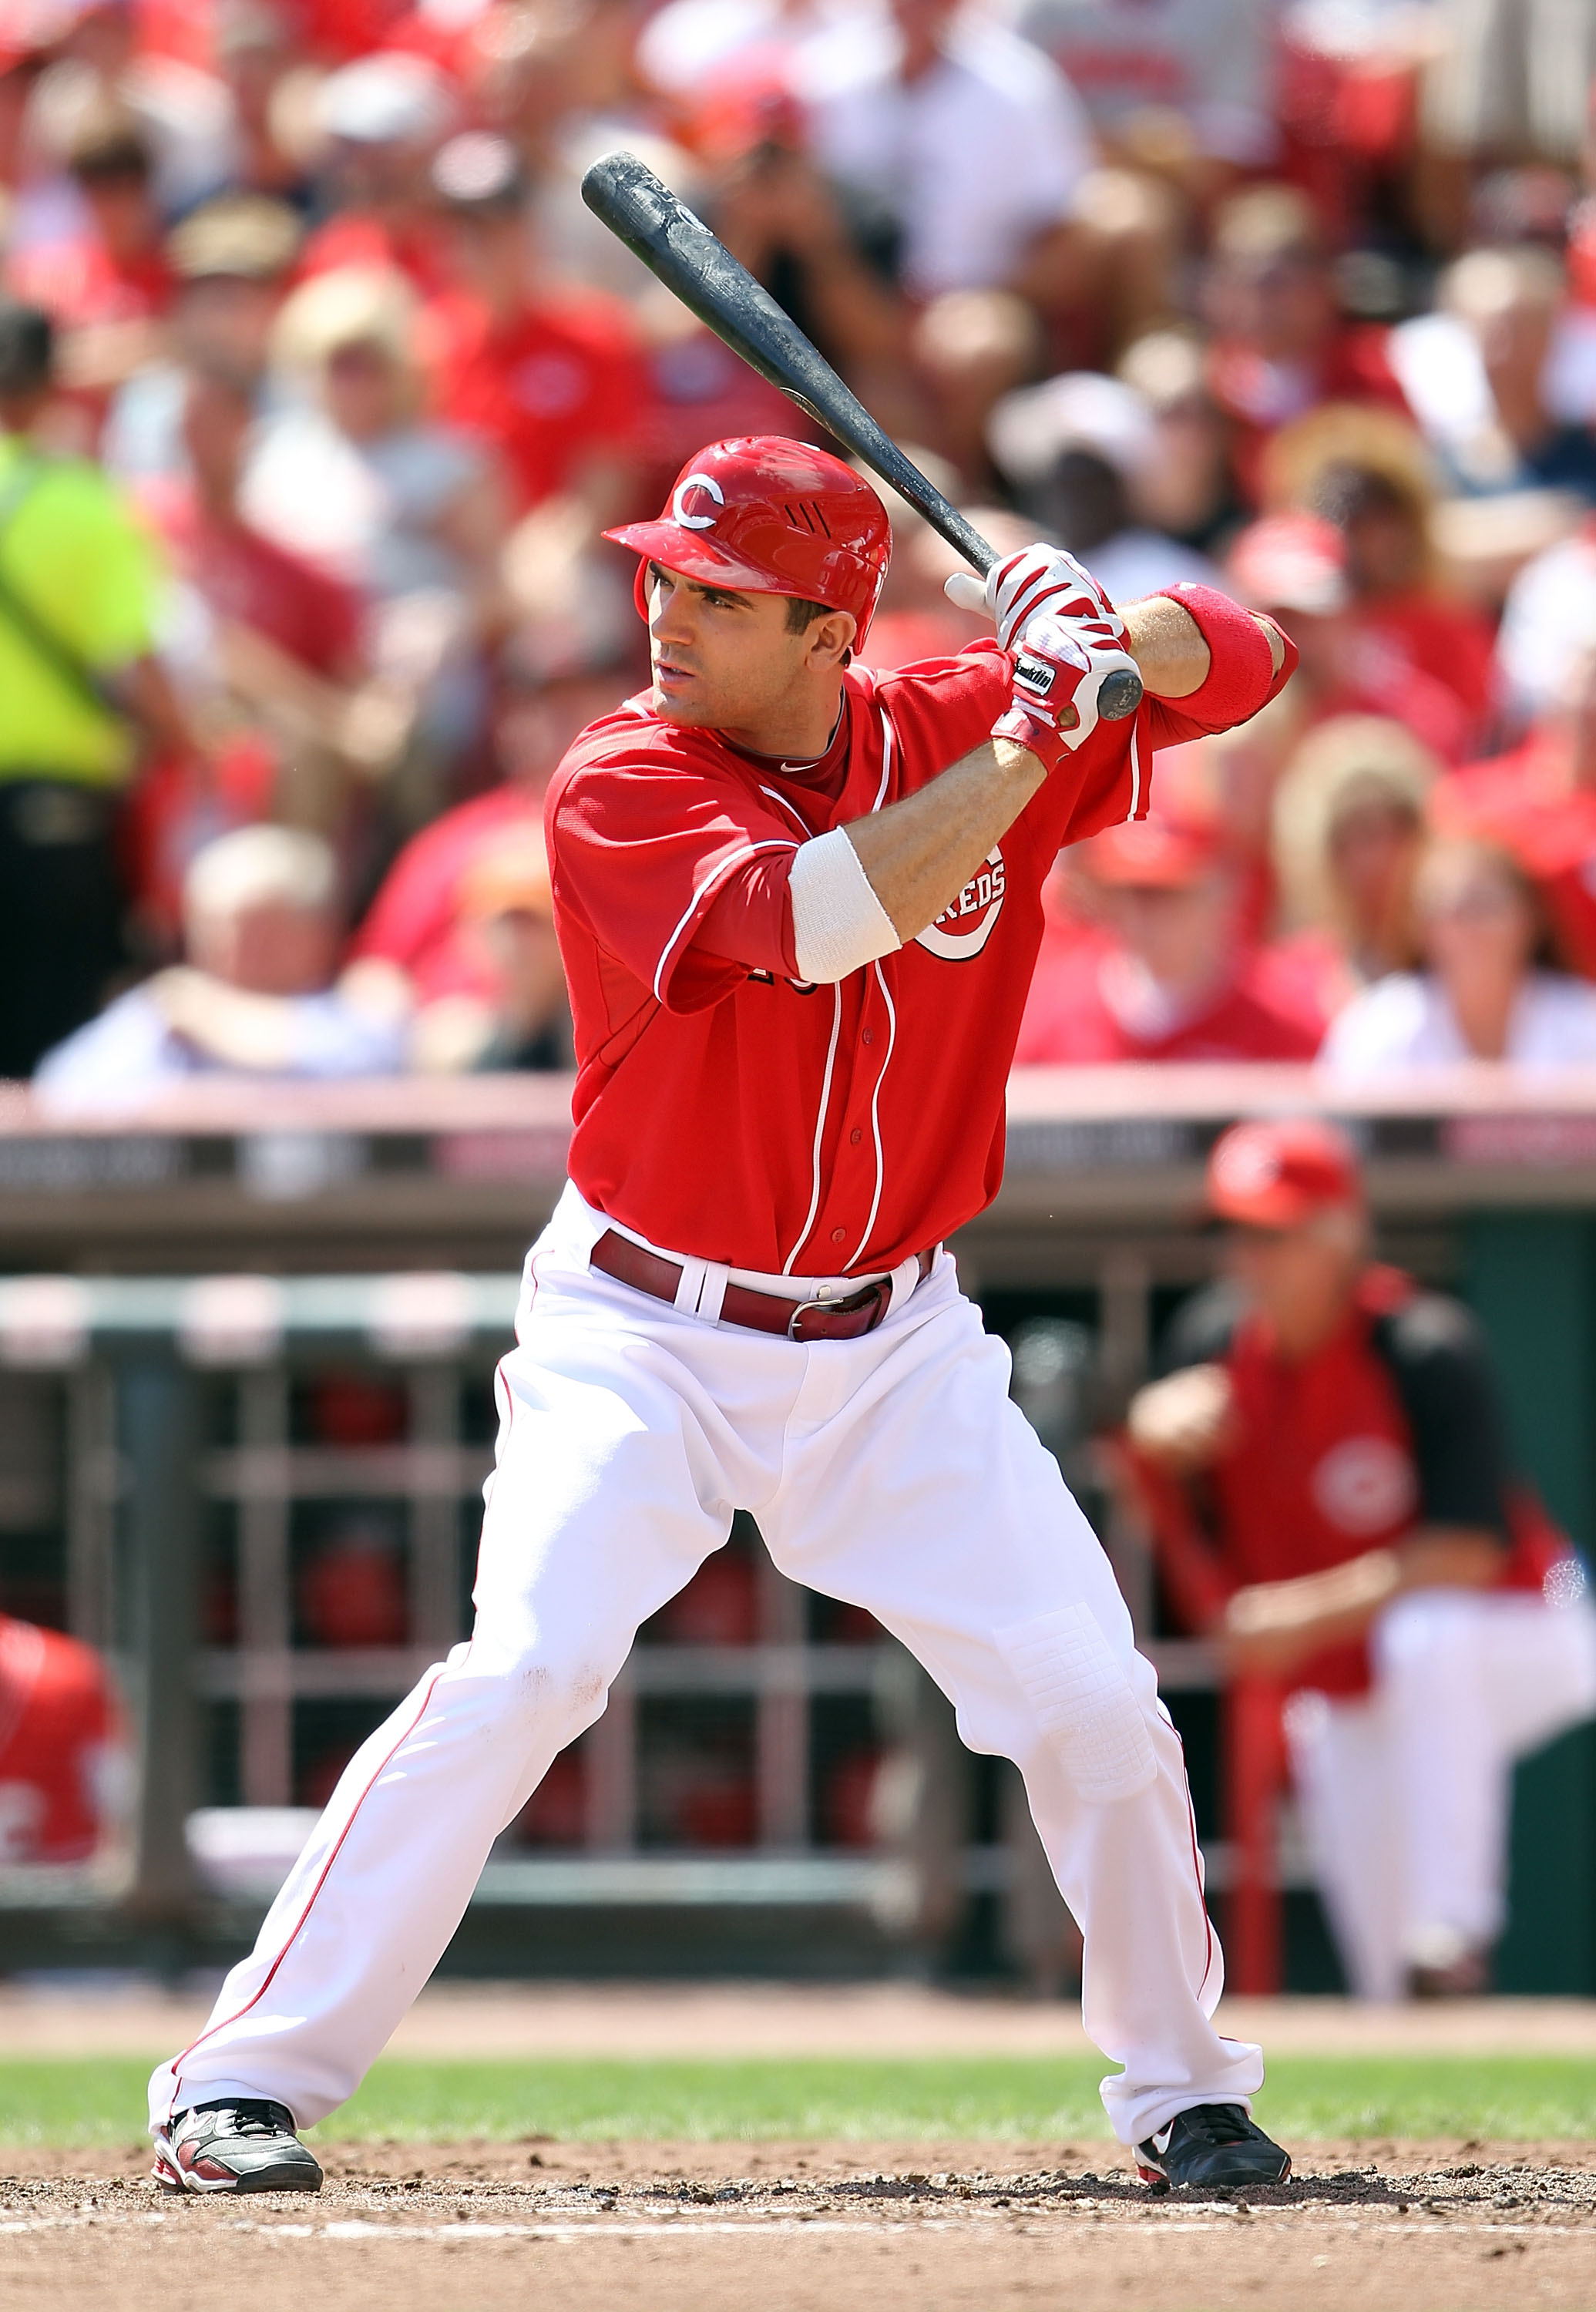 2010 N.L MVP Joey Votto 10 Reasons Why He Could Win Another One News